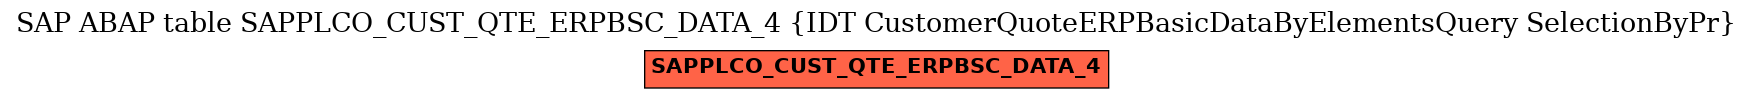 E-R Diagram for table SAPPLCO_CUST_QTE_ERPBSC_DATA_4 (IDT CustomerQuoteERPBasicDataByElementsQuery SelectionByPr)